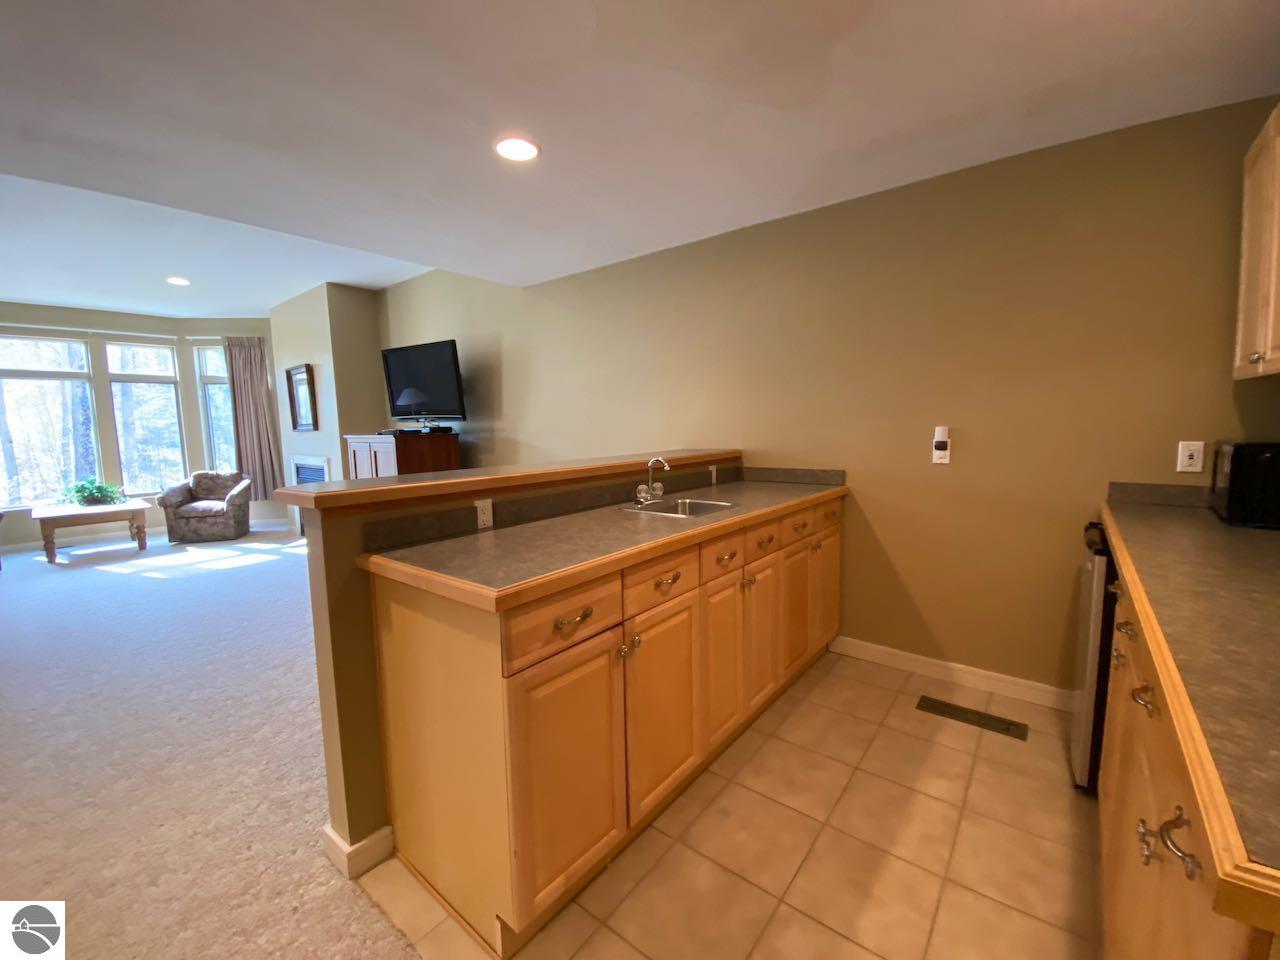 2280 Troon South, Bellaire, MI 49615 photo 40 of 58